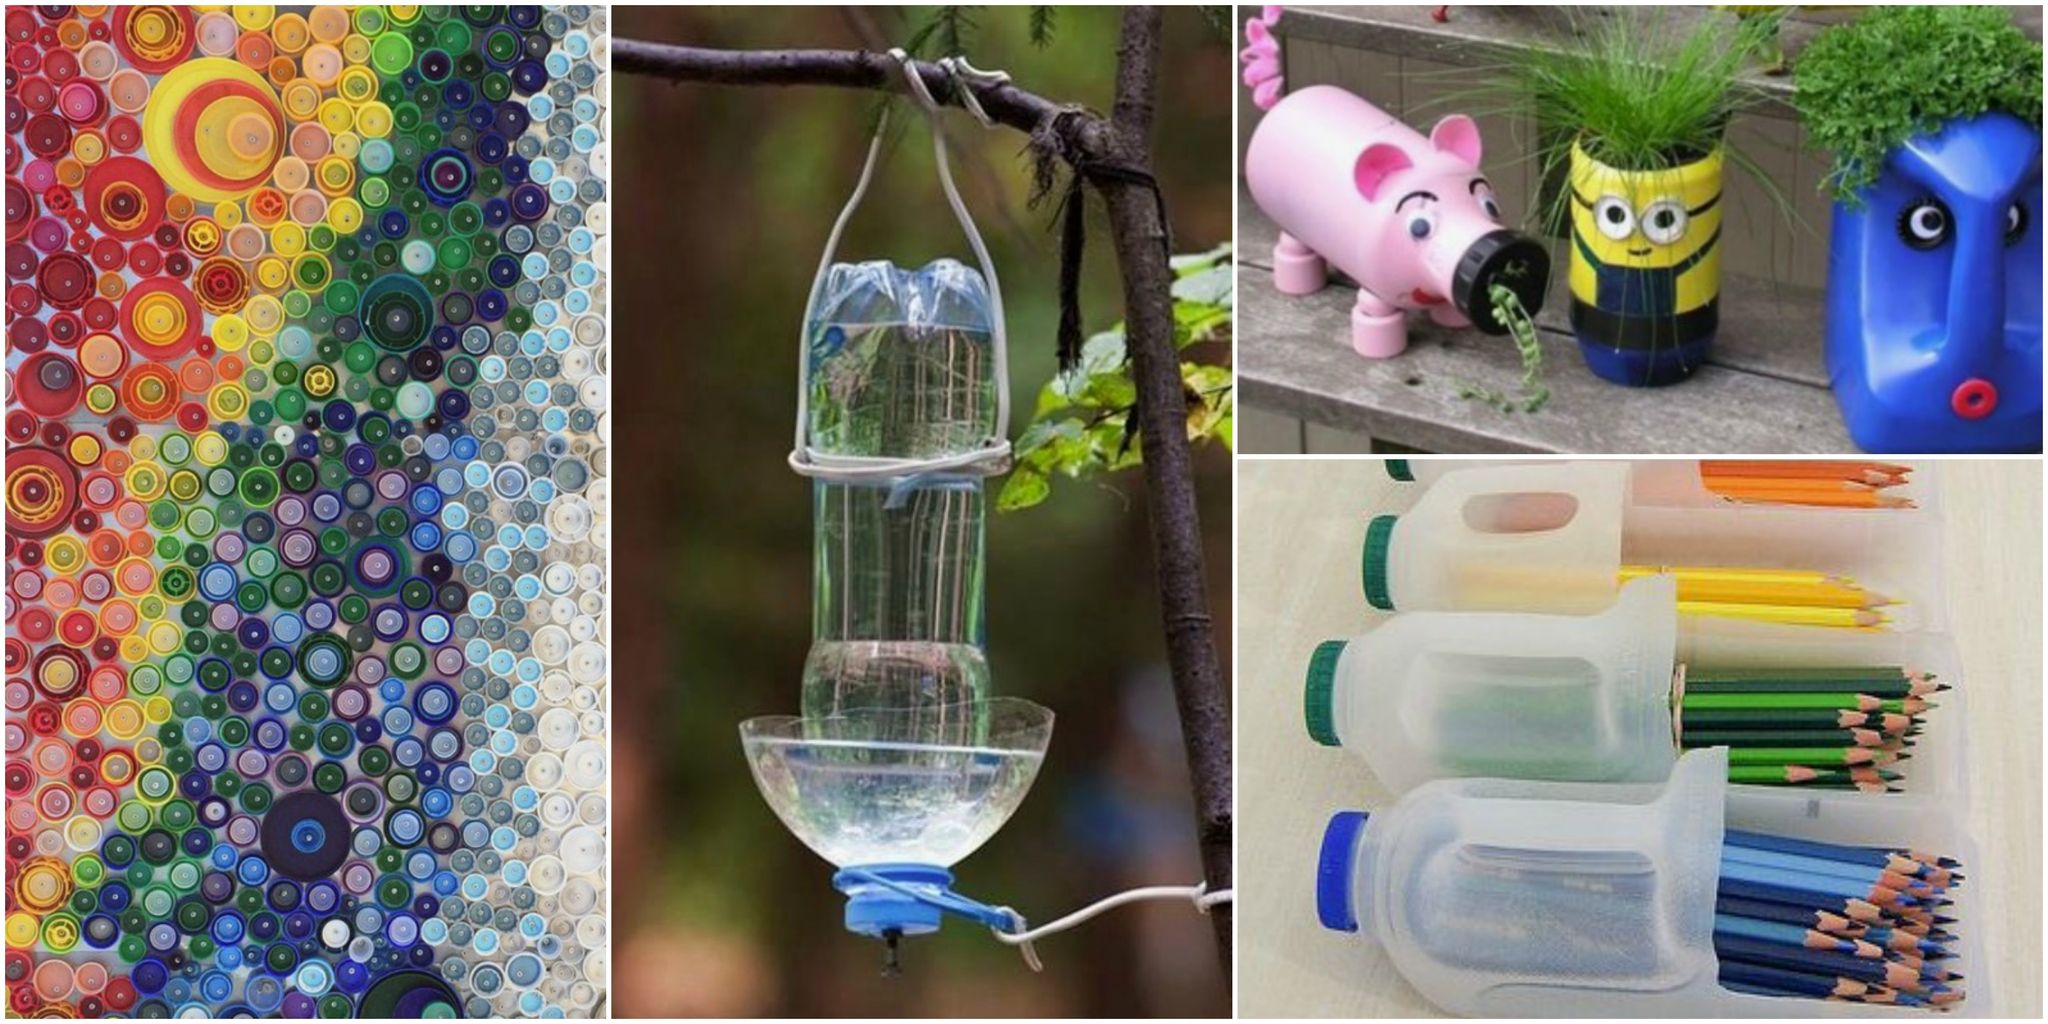 What are the creative upcycling ideas for waste?